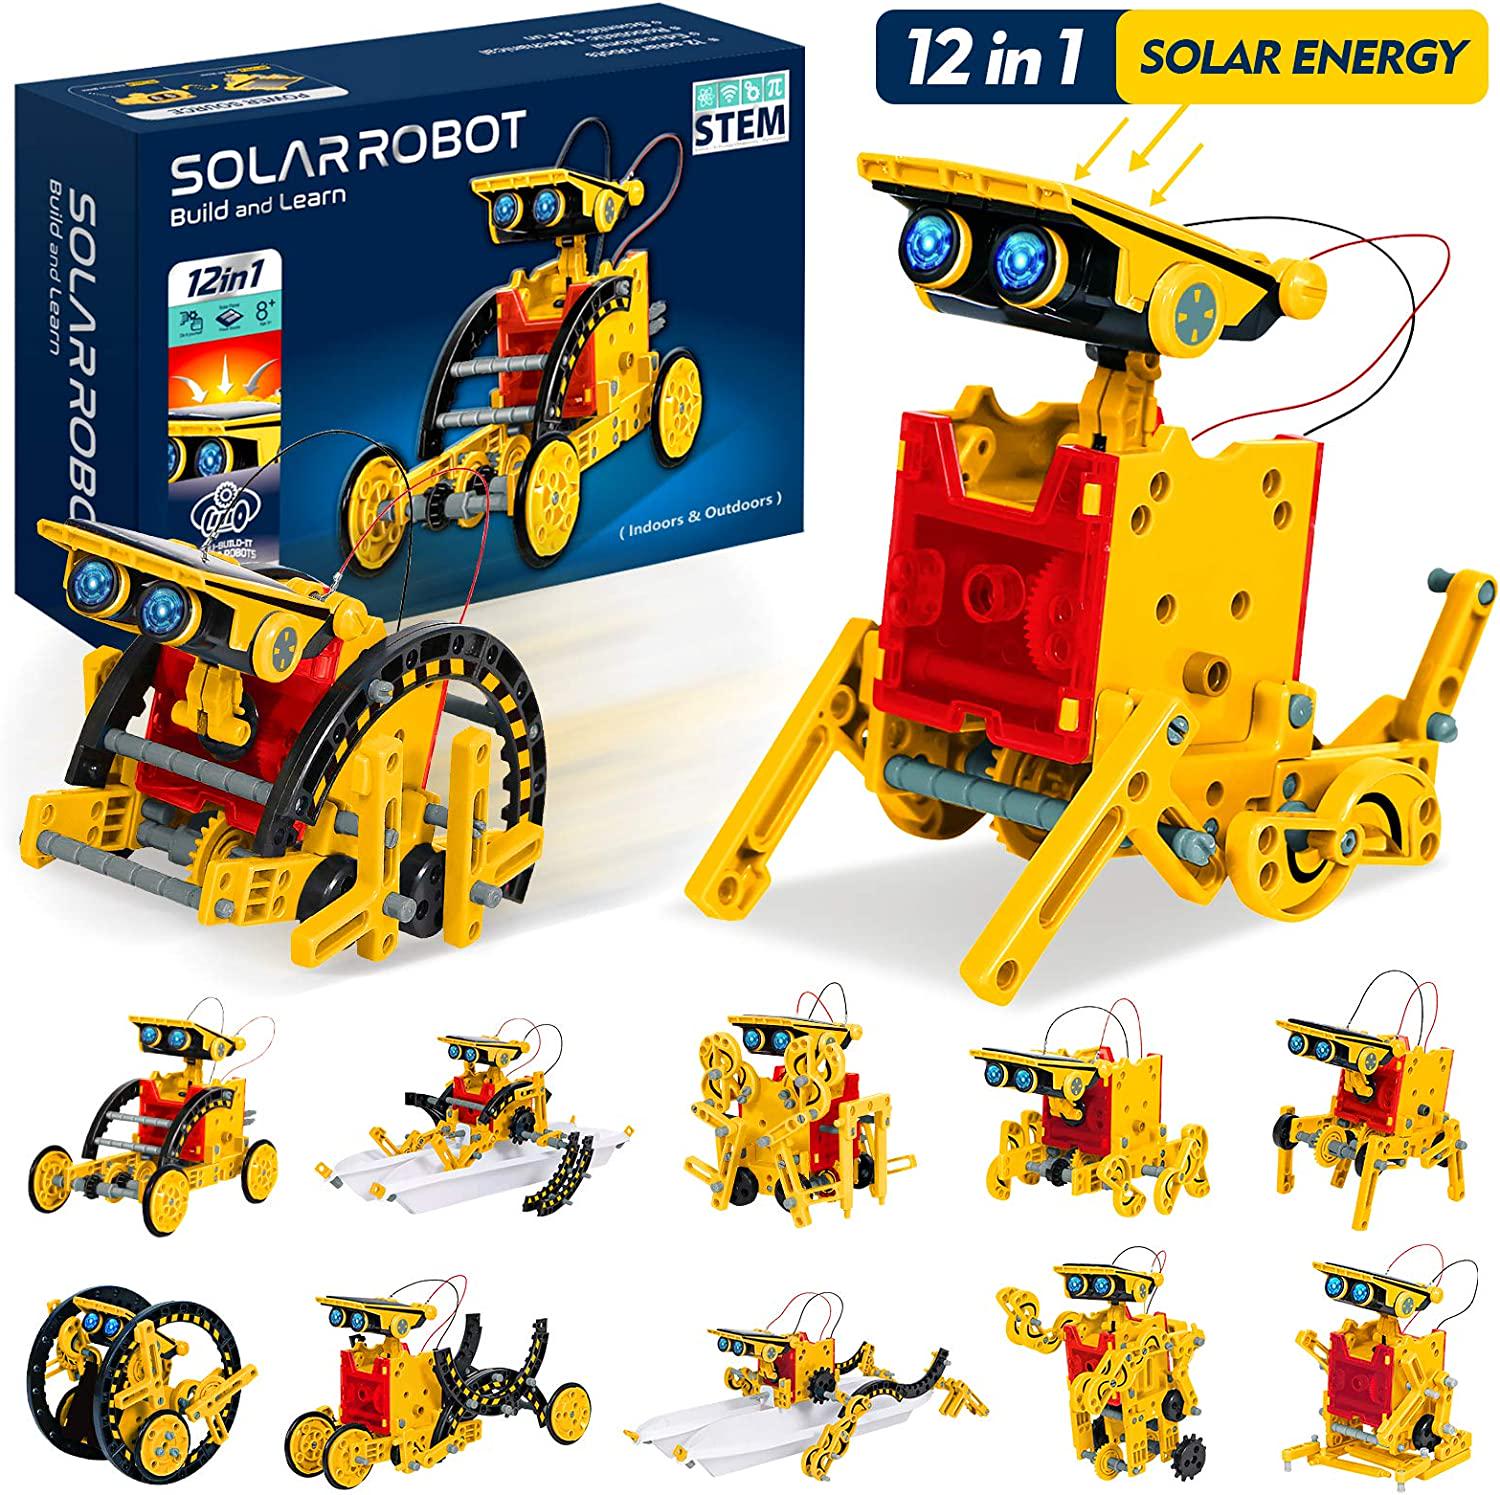 KooQii, KooQii Upgrade STEM 12 in 1 Education Solar Robot Toys, Solar and Cell Powered 2 in 1 DIY Building Learning Science Experiment Kit for Kids Aged 8-12 and Older